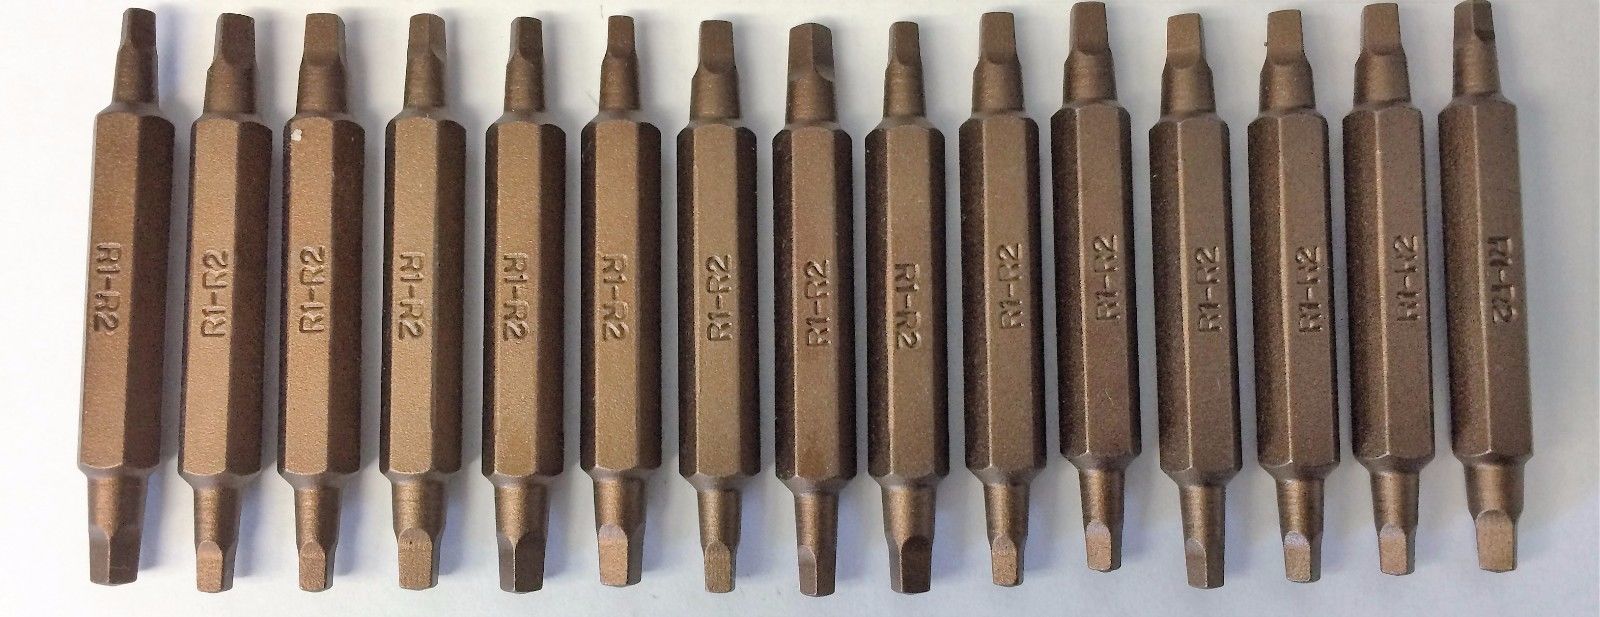 Bosch 9916473 R1 & R2 2" Double Ended Square Screw Tips USA 15PCS